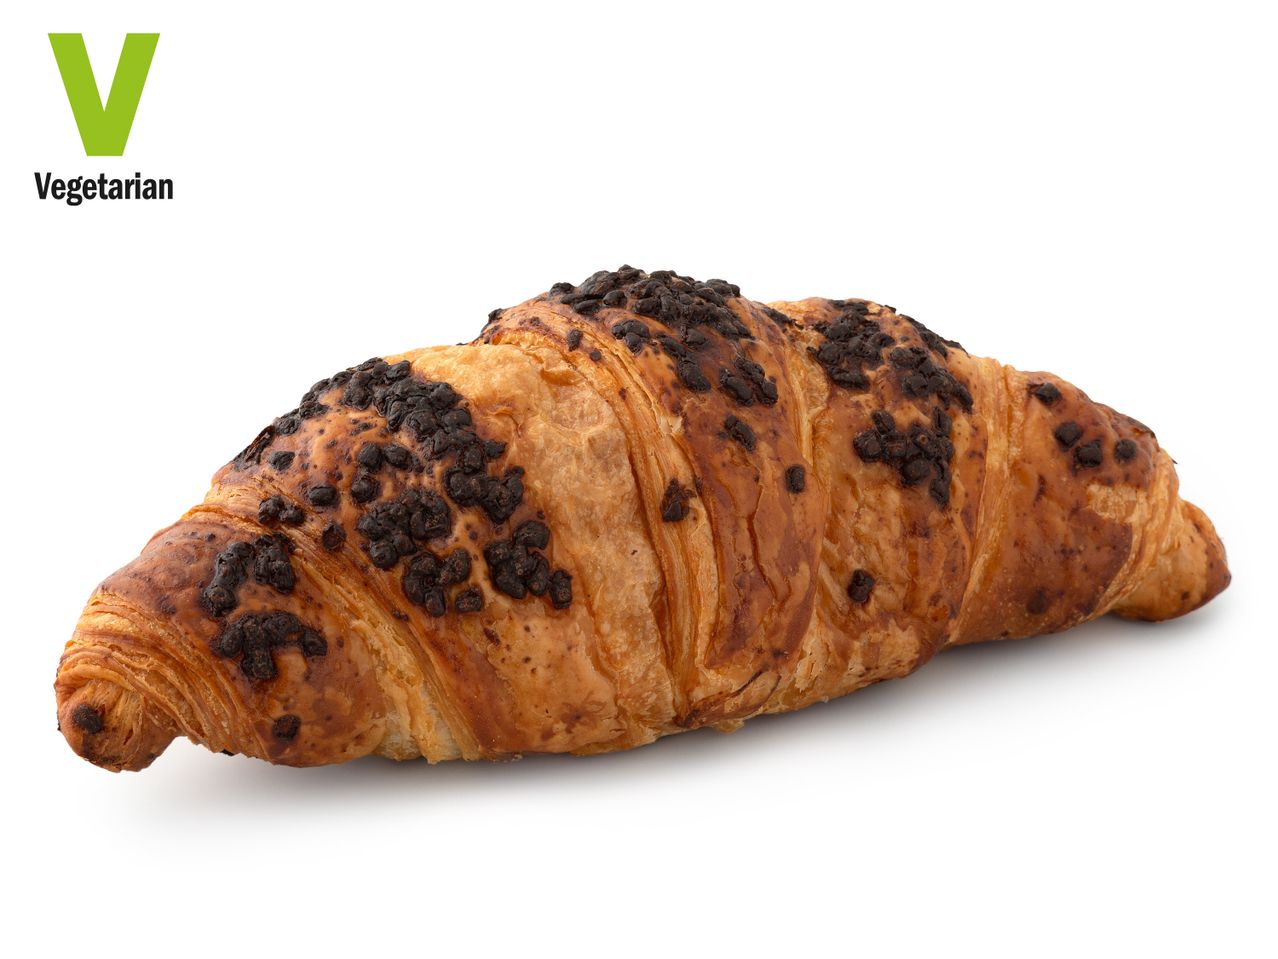 Go to full screen view: Chocolate Hazelnut Croissant - Image 1